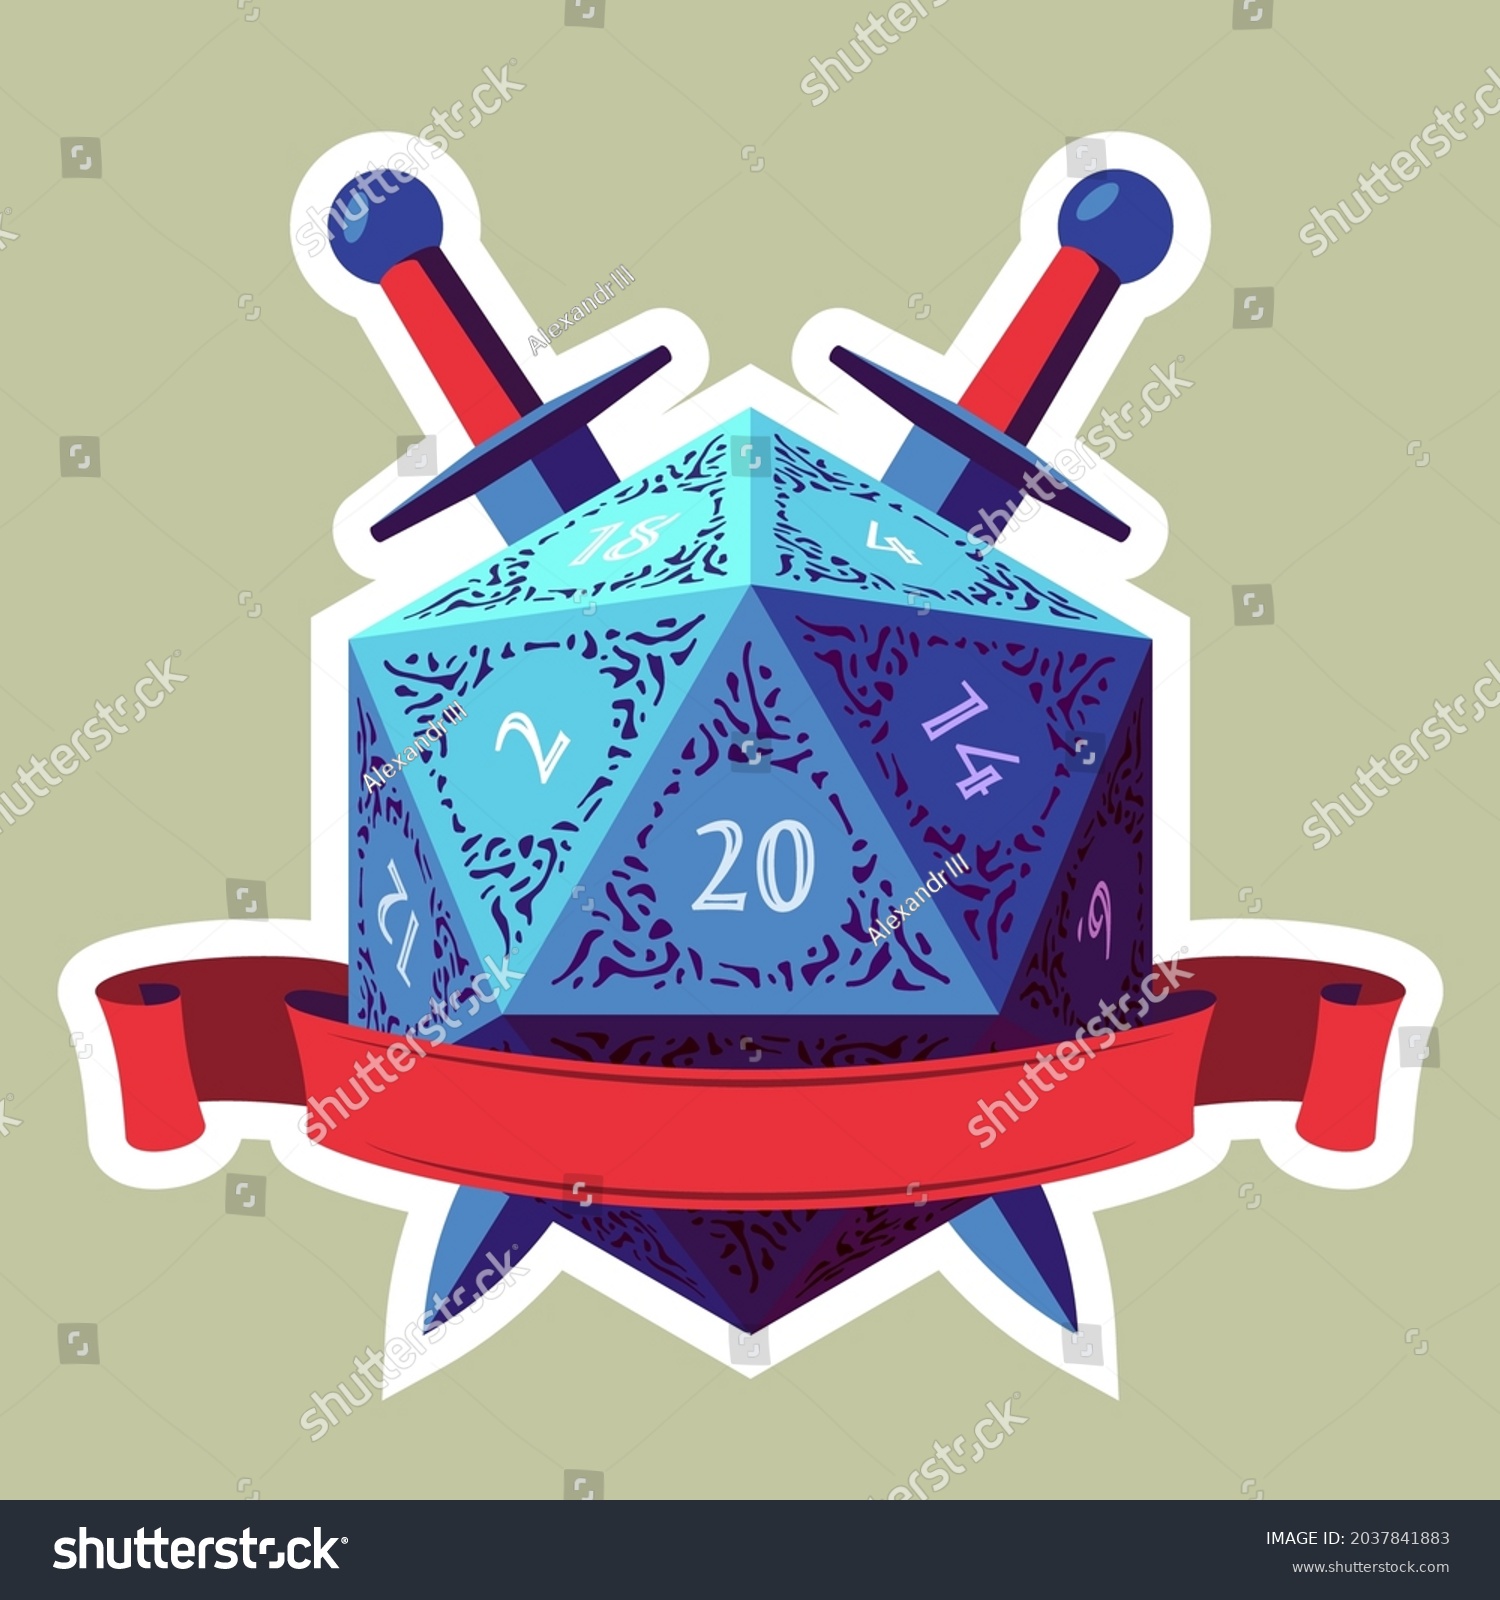 SVG of Blue D20 Die With Red Ribbon and Swords. Flat Style svg